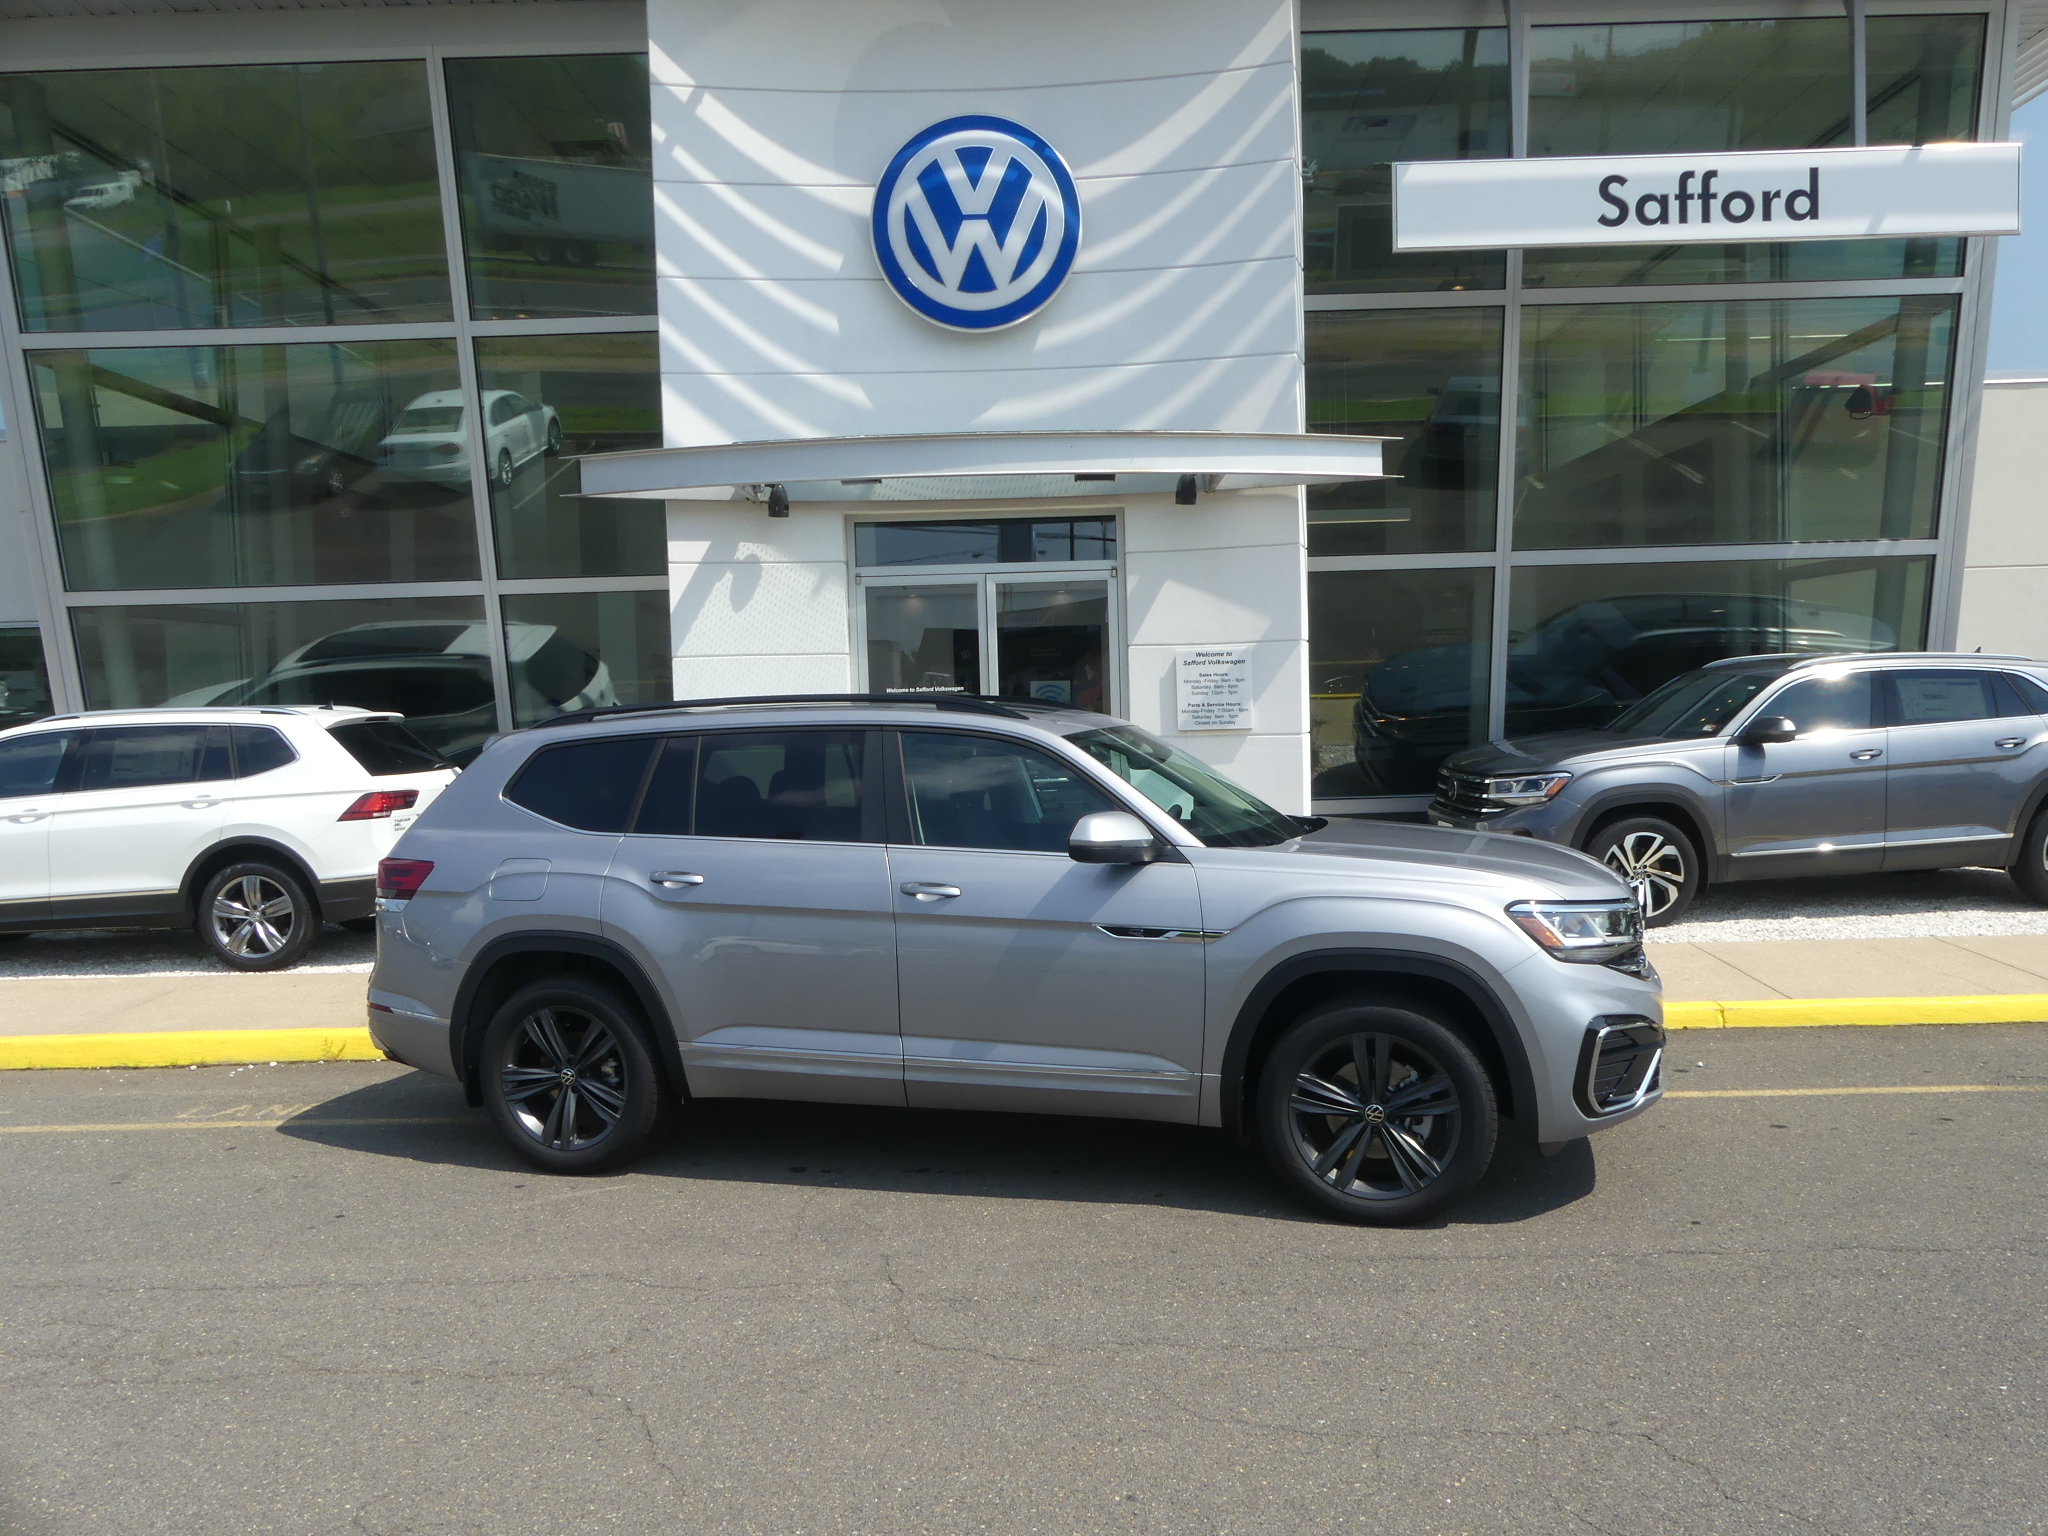 New 2021 Volkswagen Atlas V6 SE with Technology R-Line with 4MOTION® in